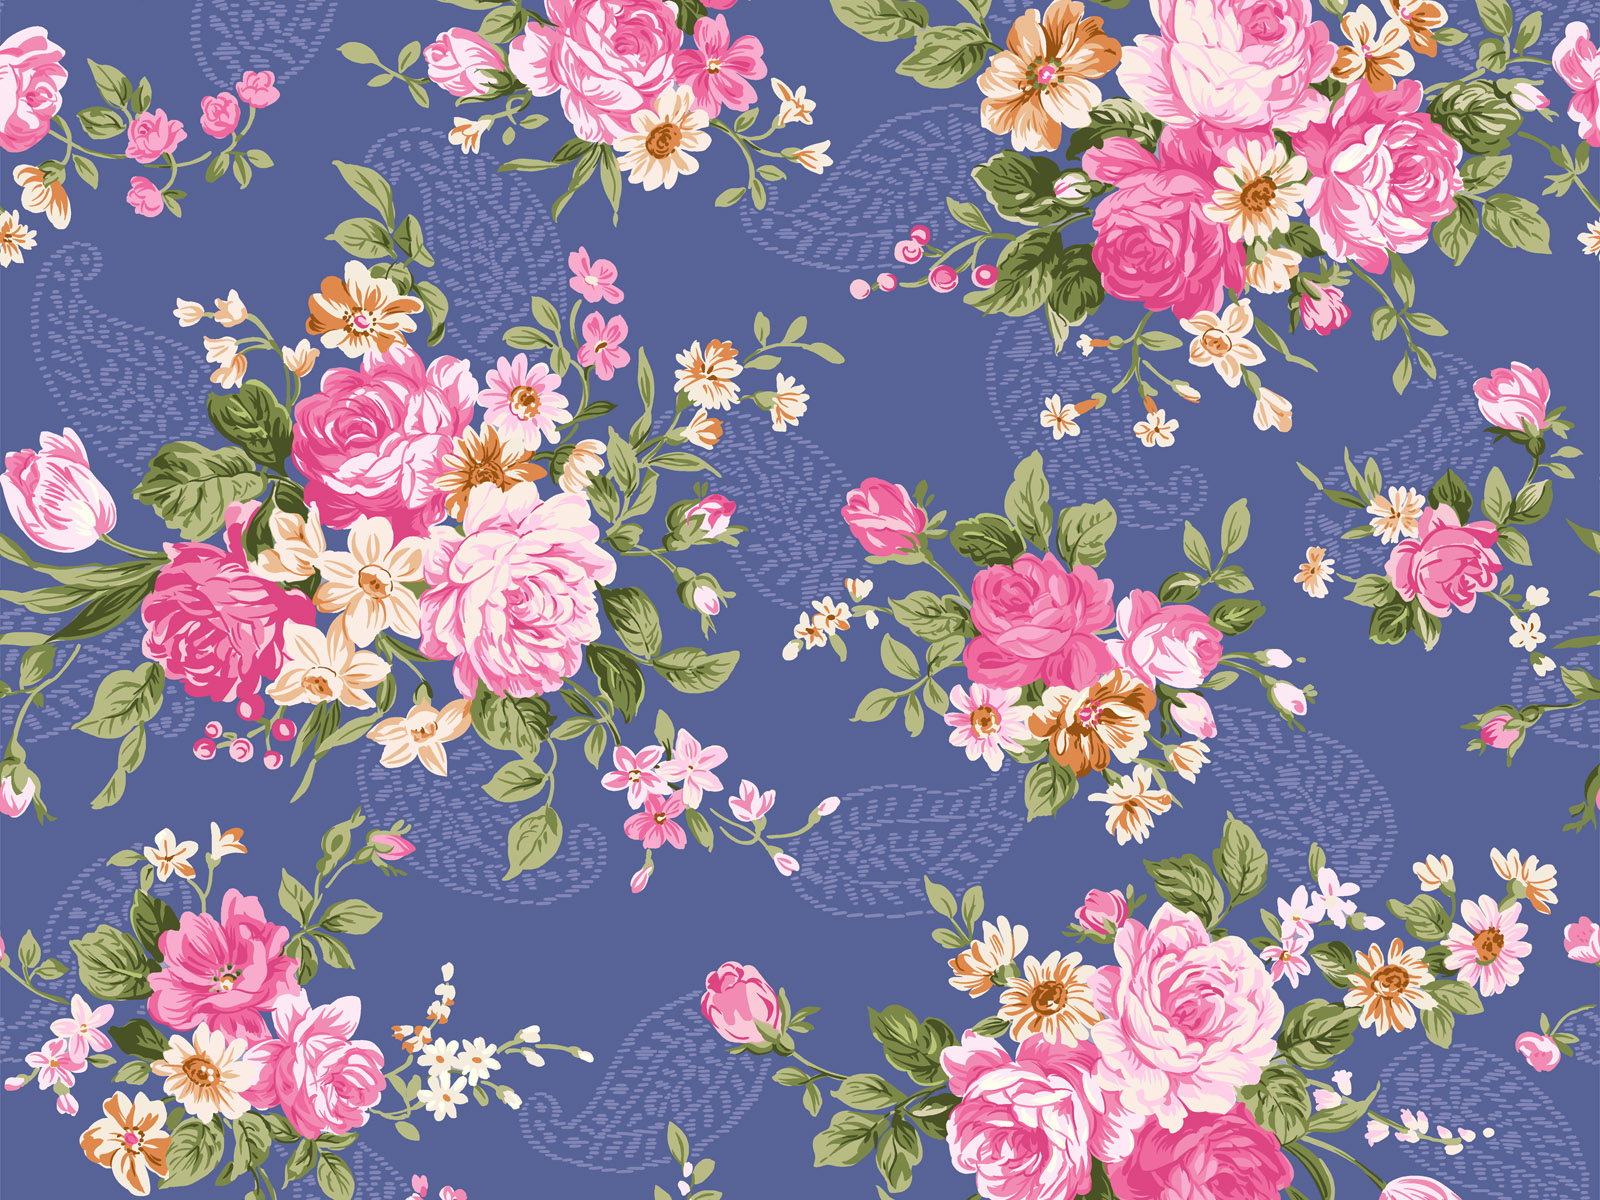 Cute Floral Background Patterns - HD Wallpaper 